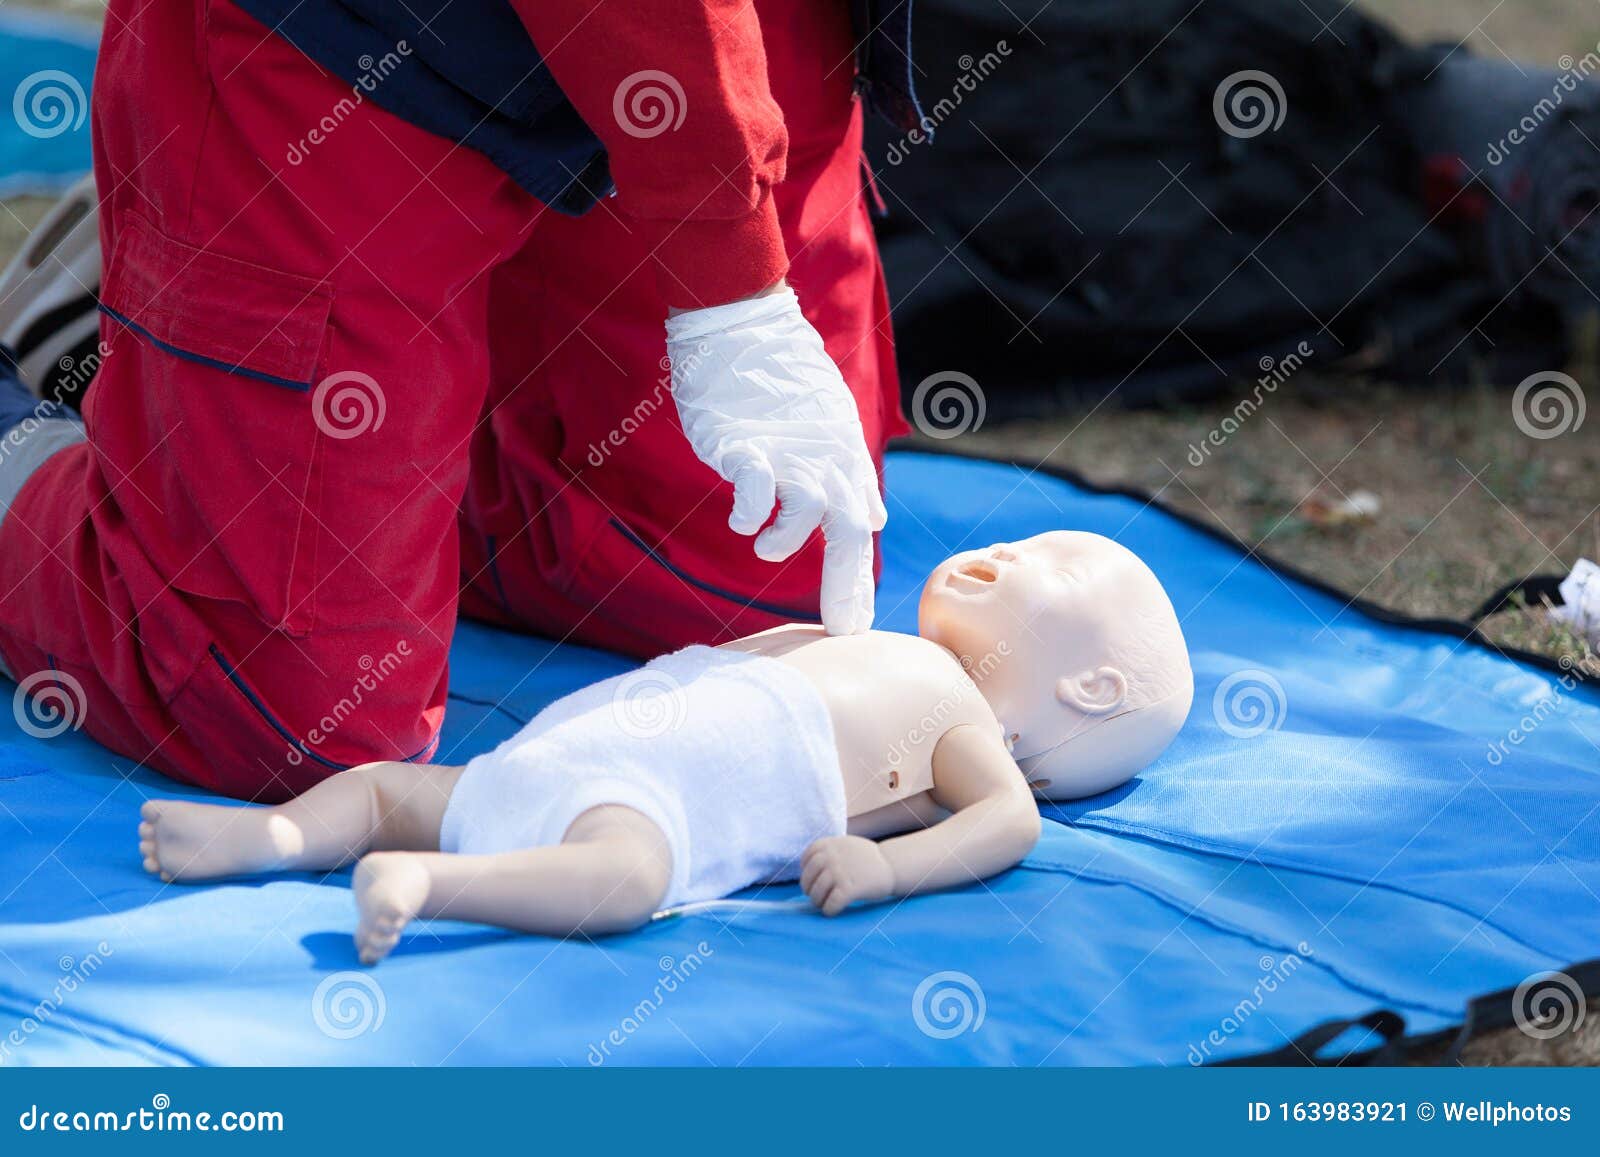 Baby CPR Dummy First Aid Training Stock Image - Image of ...